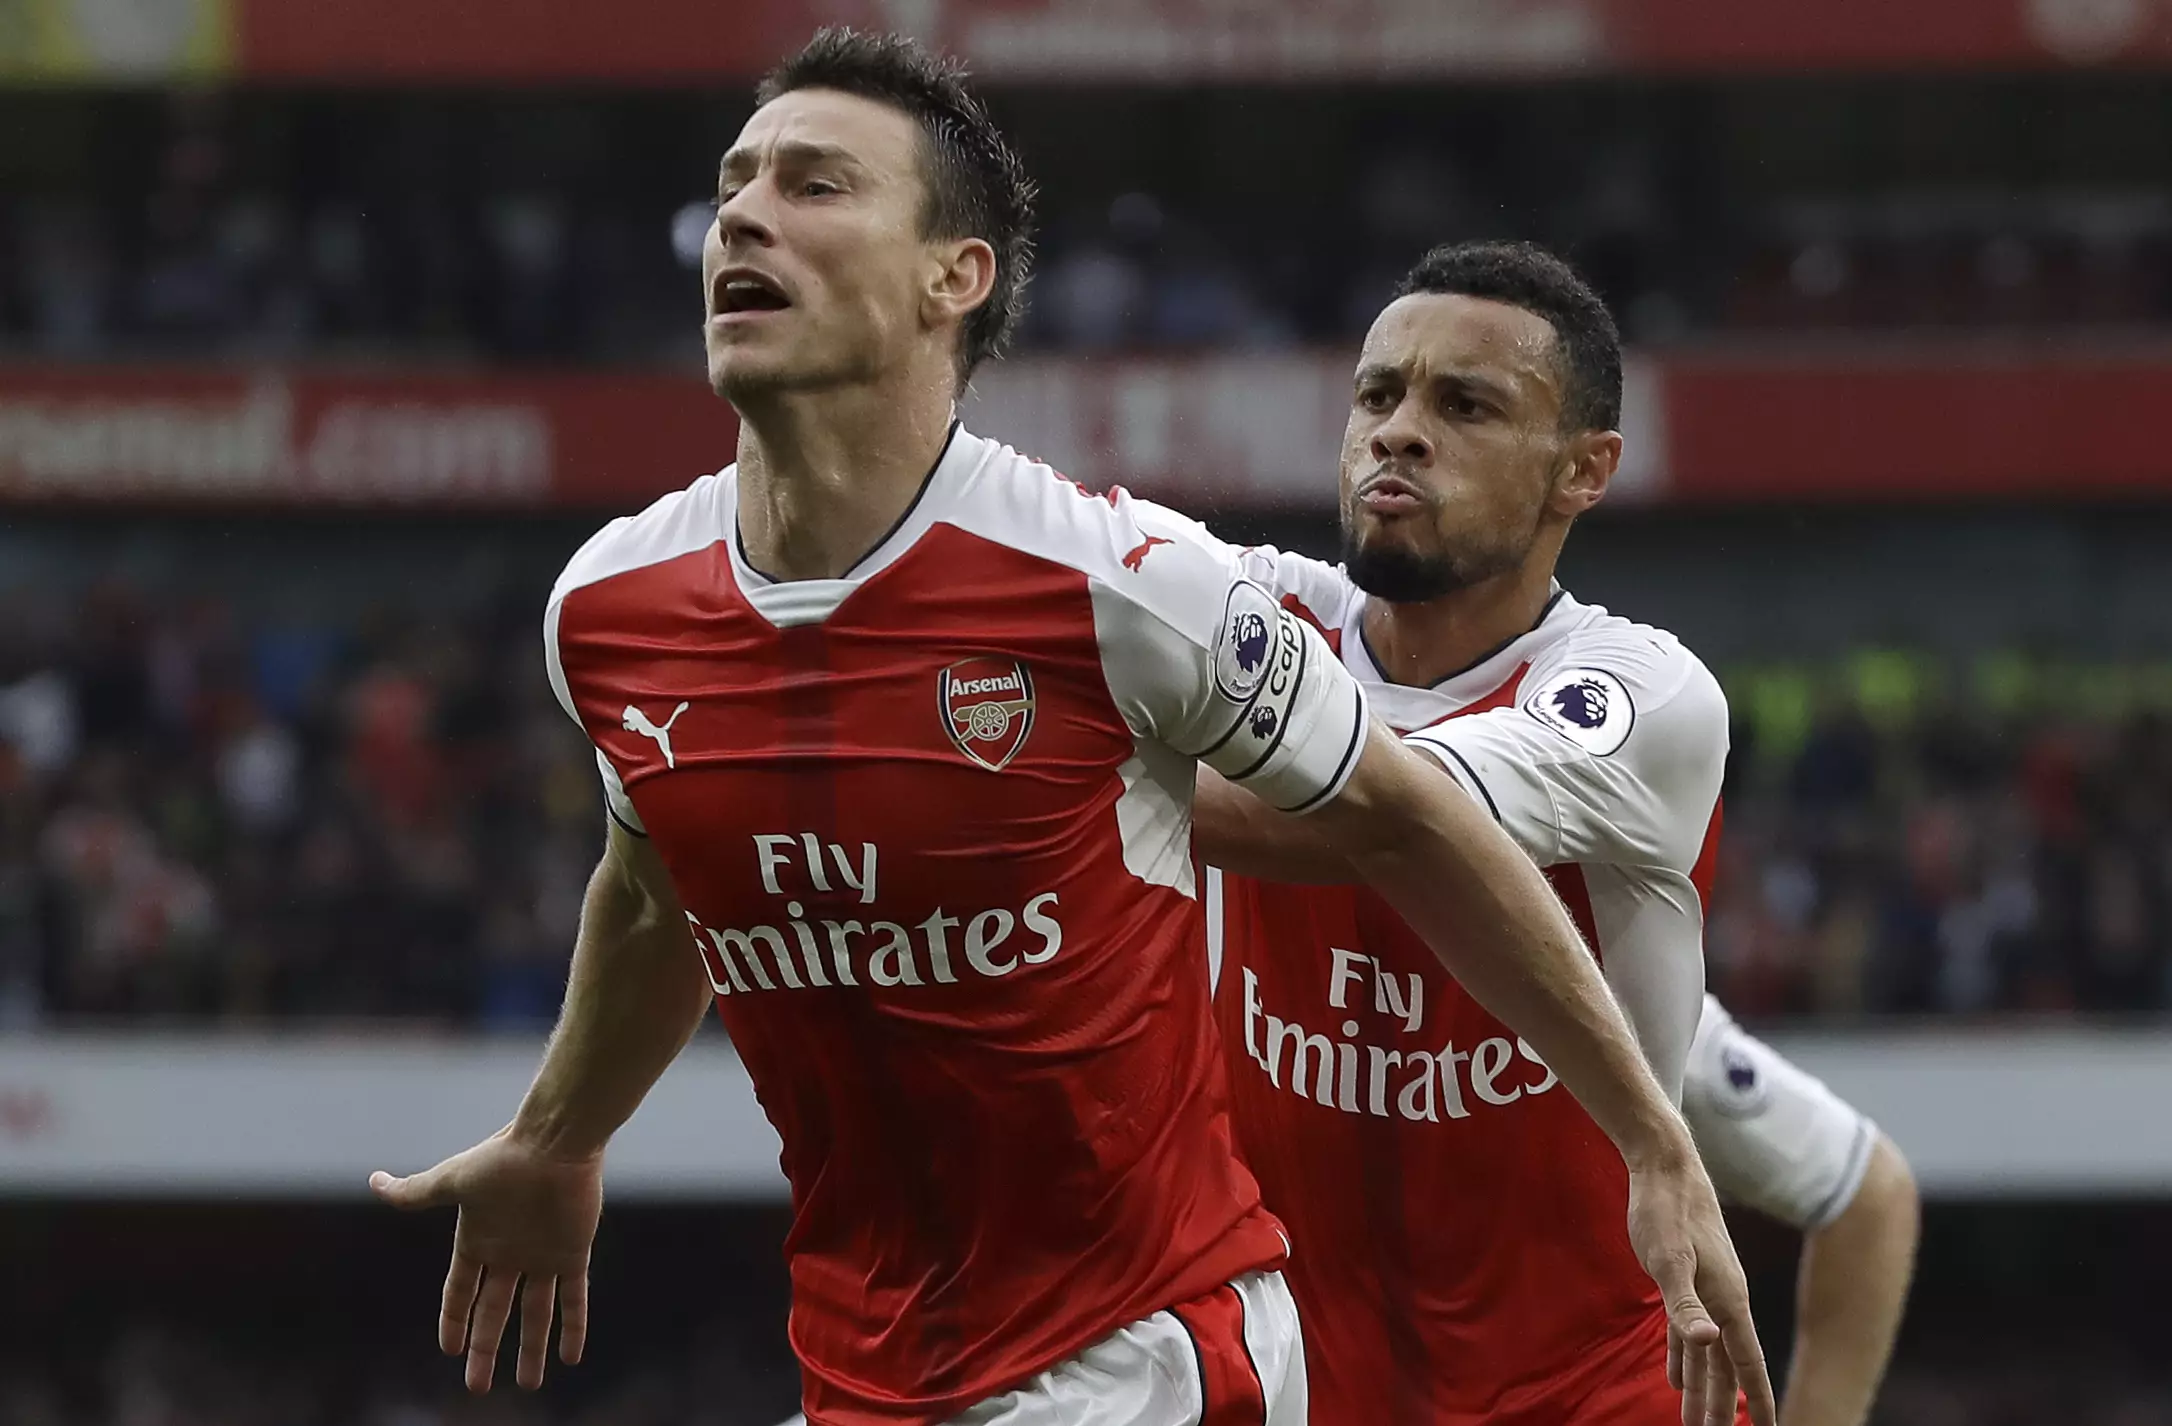 Laurent Koscielny Is The Proud Owner Of A Very Impressive Record